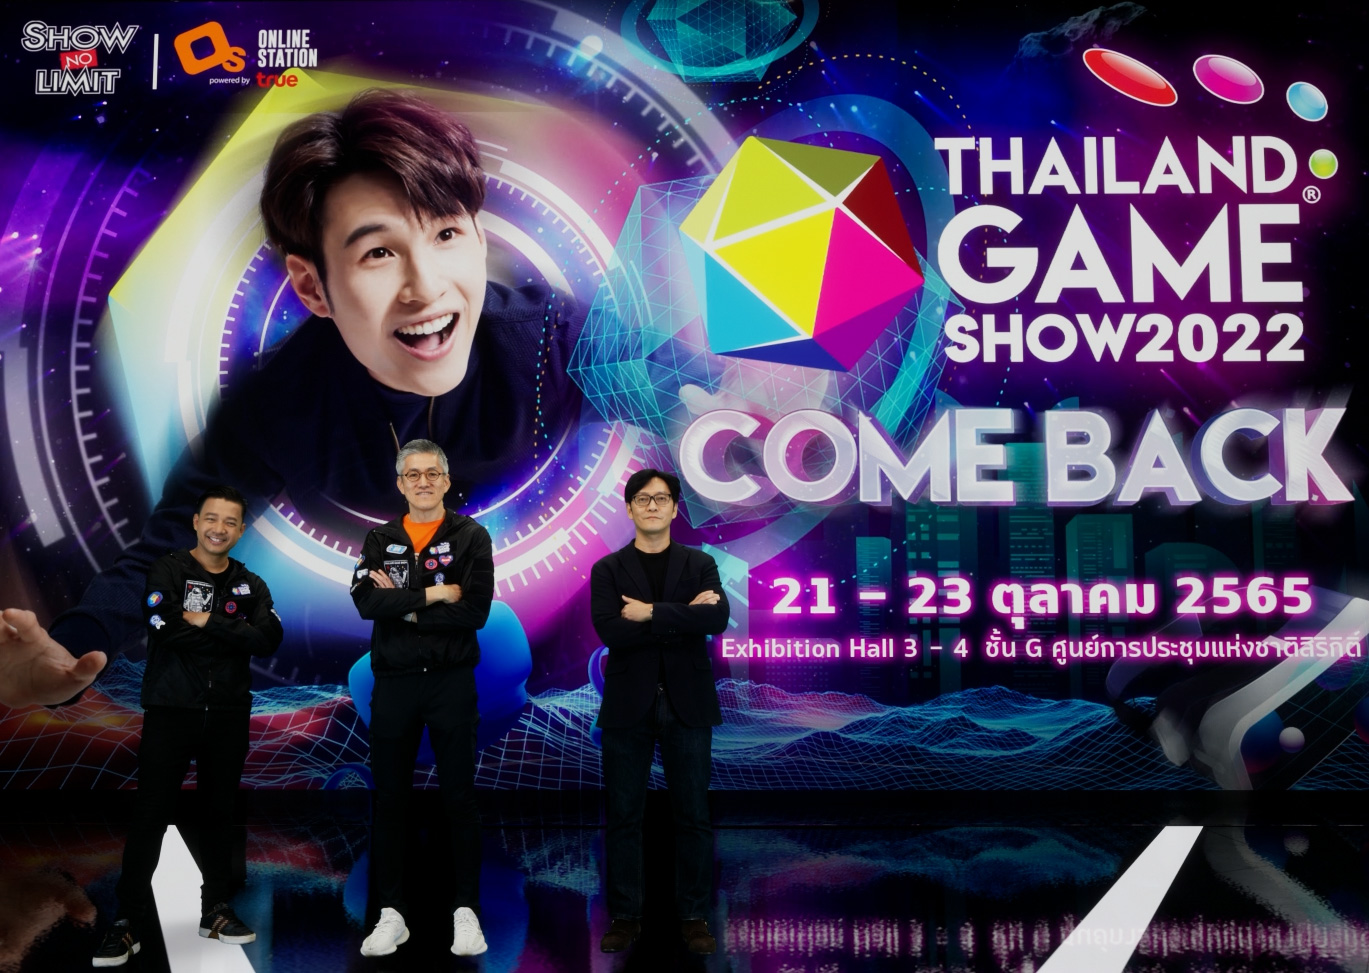 QSNCC Welcomes the Return of Thailand Game Show 2022